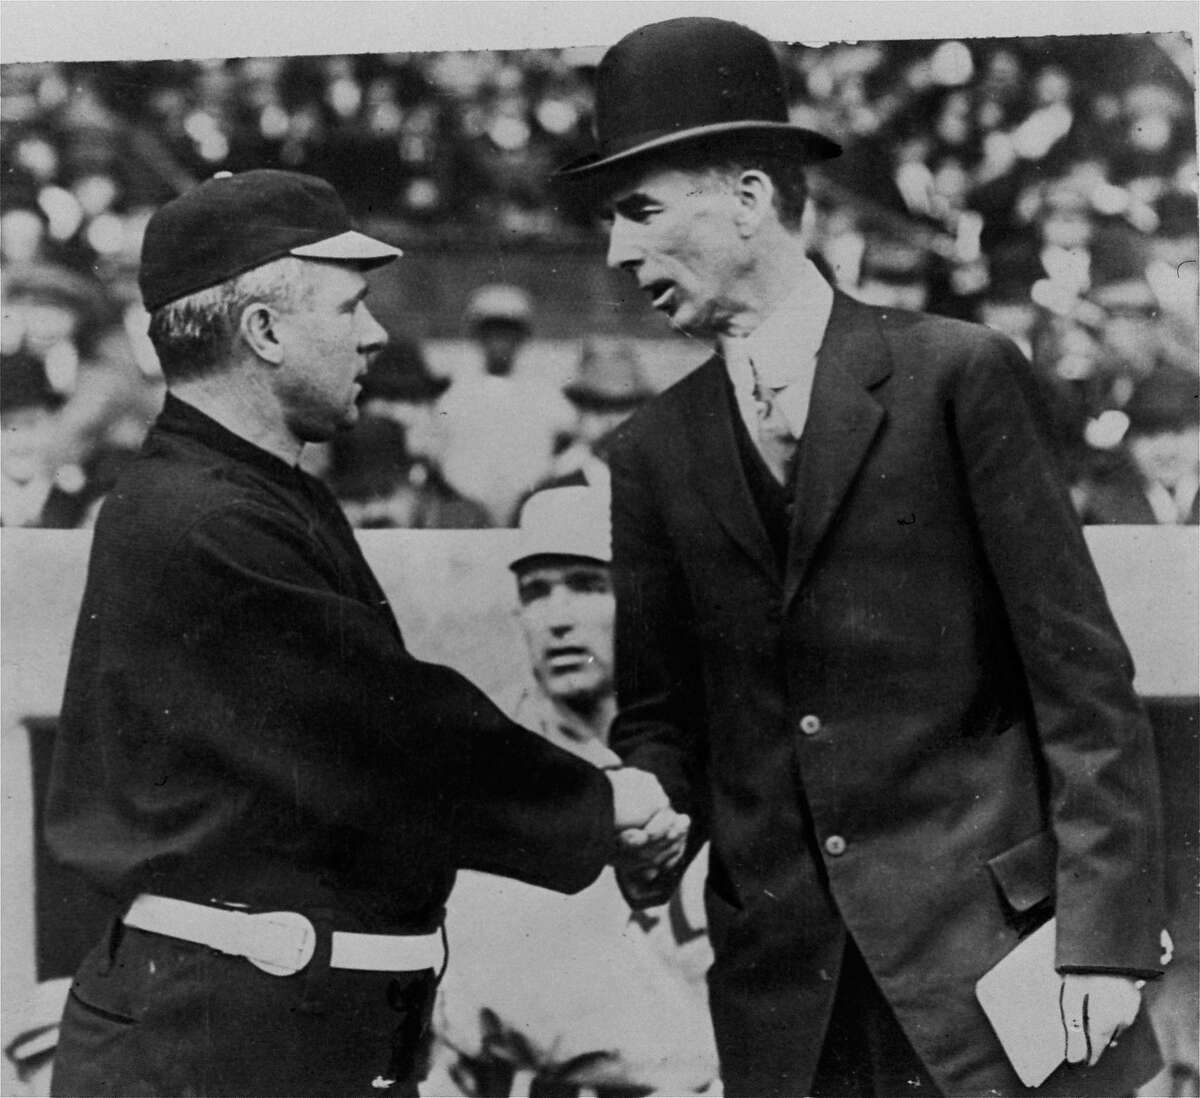 1911: Opposing managers Connie Mack, right, and John McGraw, at the opening game of the 1911 World Series, New York City, October 14, 1911. Mack's Philadelphia Athletics defeated McGraw's New York Giants in 6 games.